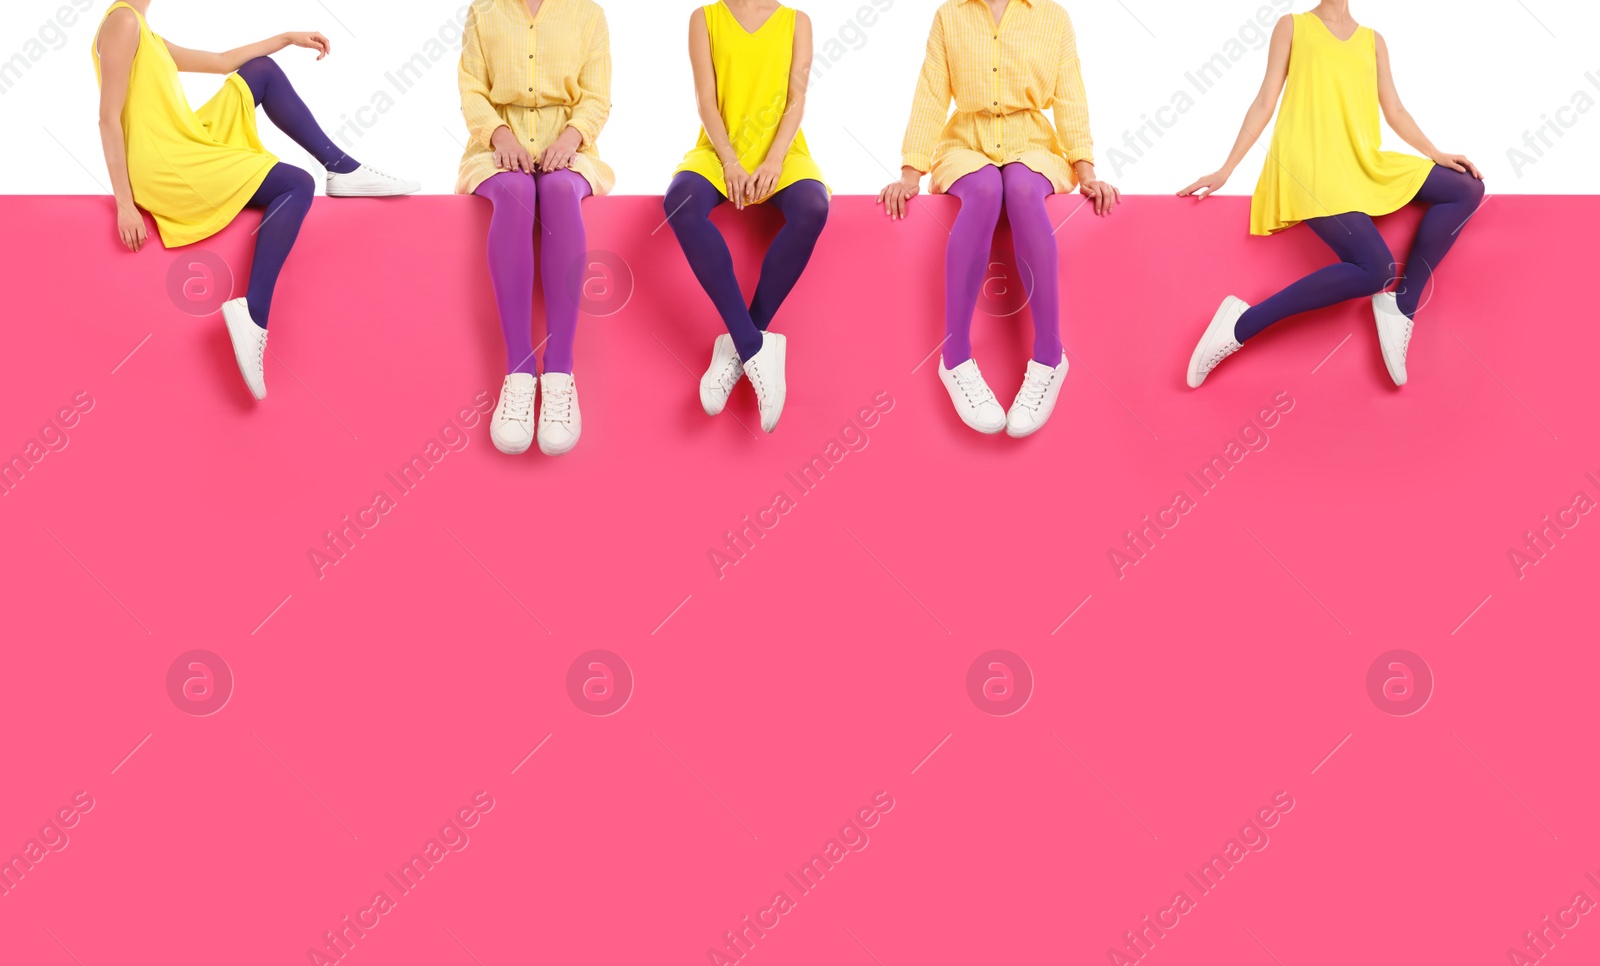 Image of Women wearing different bright tights and stylish shoes sitting on color background, closeup 